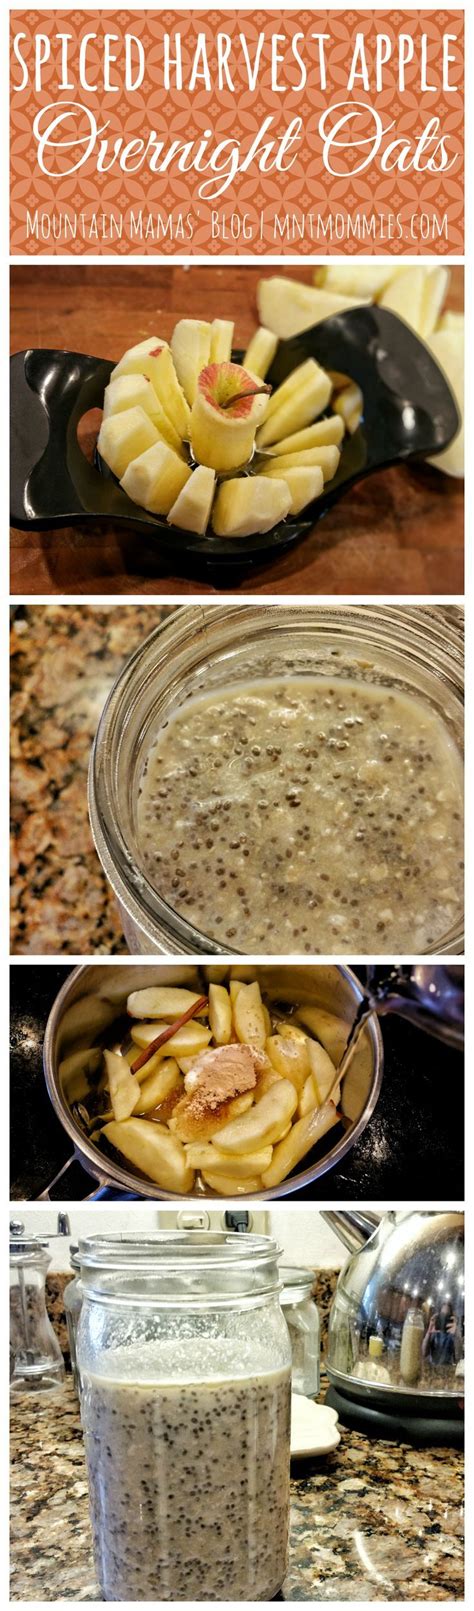 Filling whole grain oats, creamy greek yogurt, and fruit make this a light and nutritious meal that can be enjoyed either cold or how to make a healthy breakfast for weight loss. Spiced Harvest Apple Overnight Oats Breakfast Recipe ...